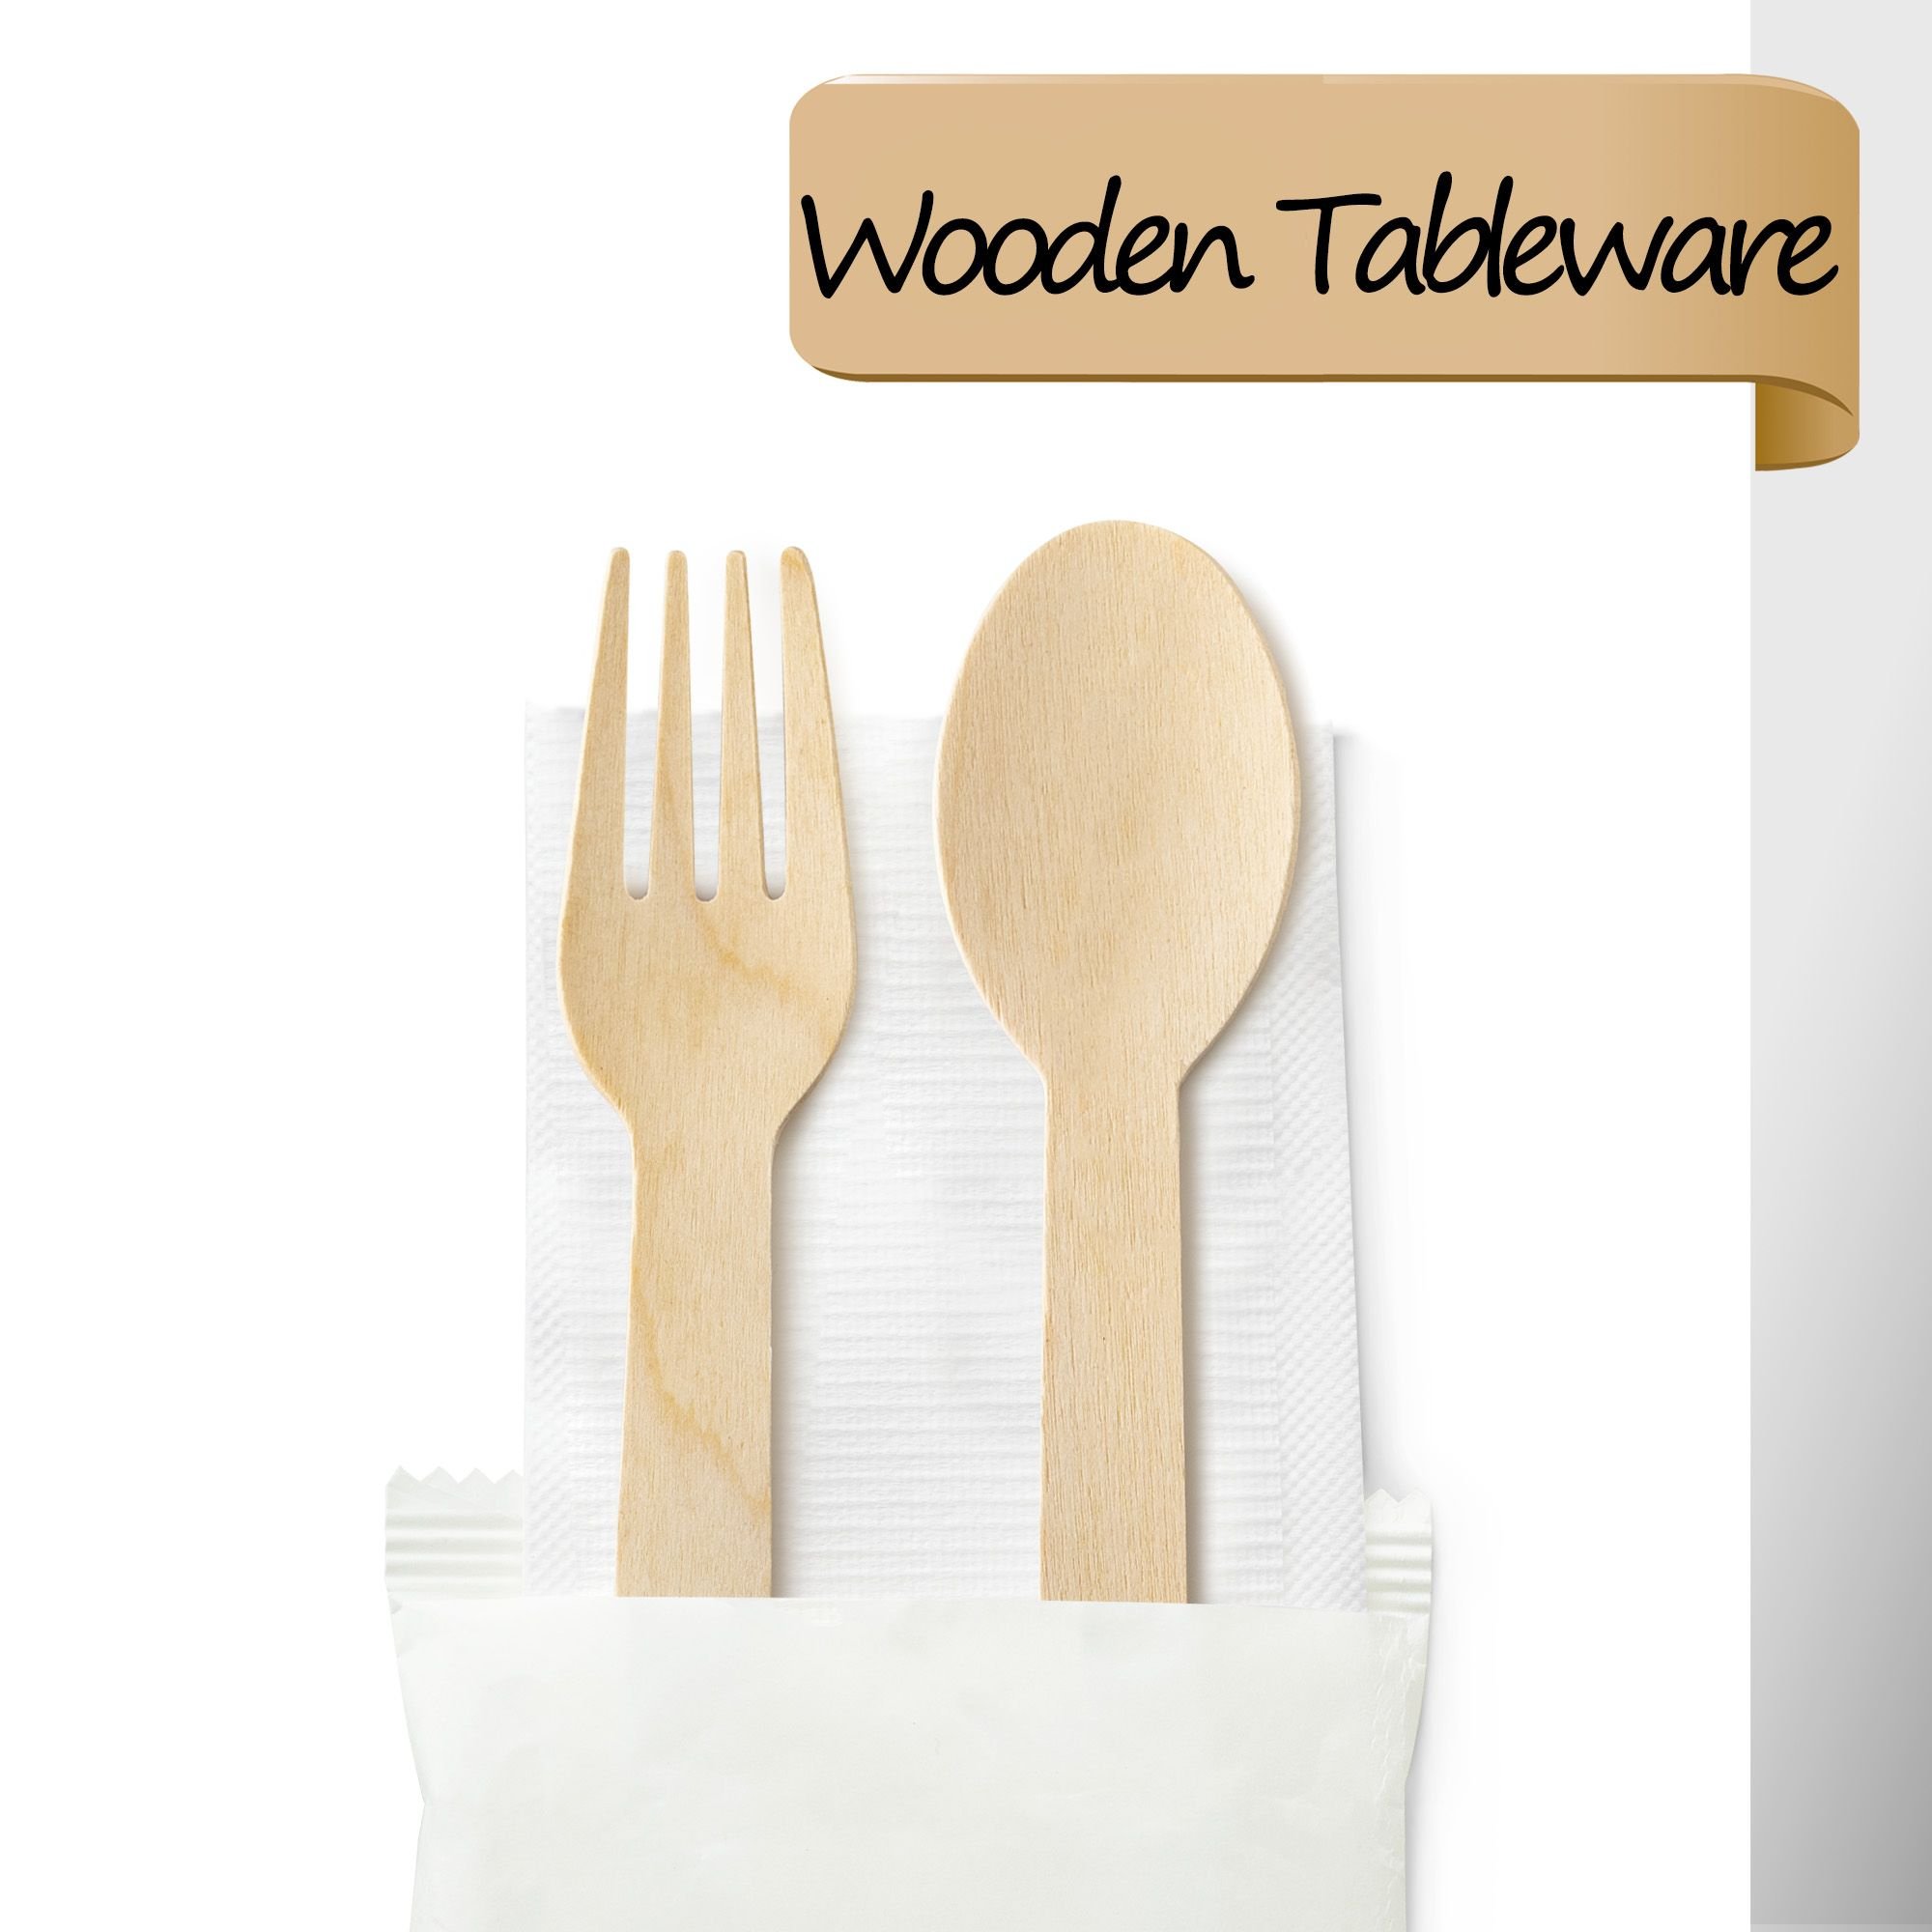 Wooden Disposable Tableware Set